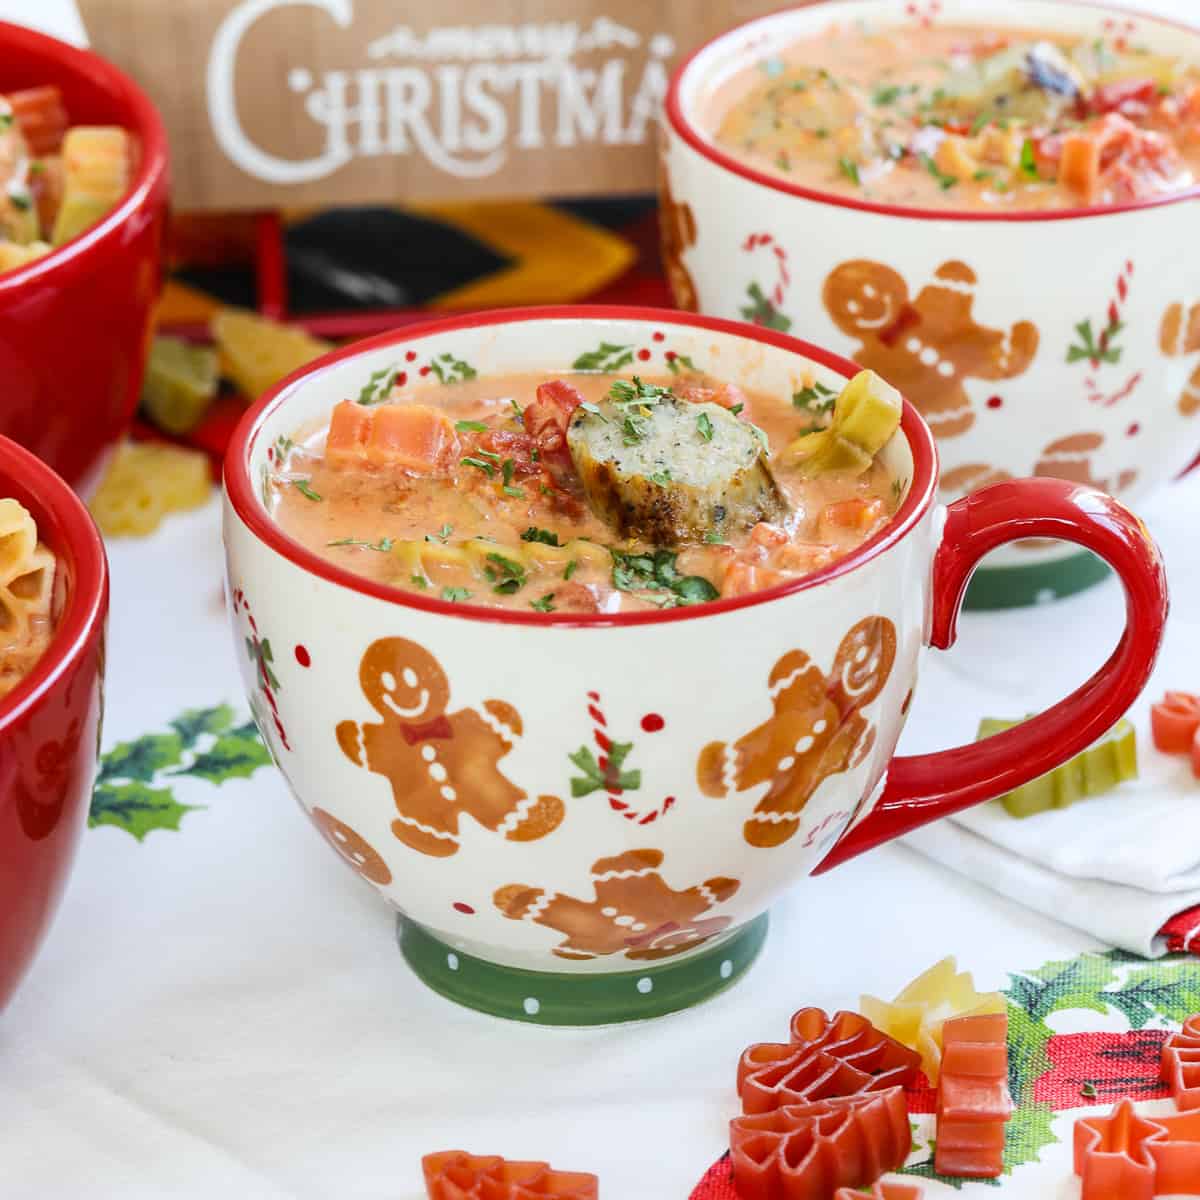 A cheerful red handled holiday mug with gingerbread filled with Christmas soup.